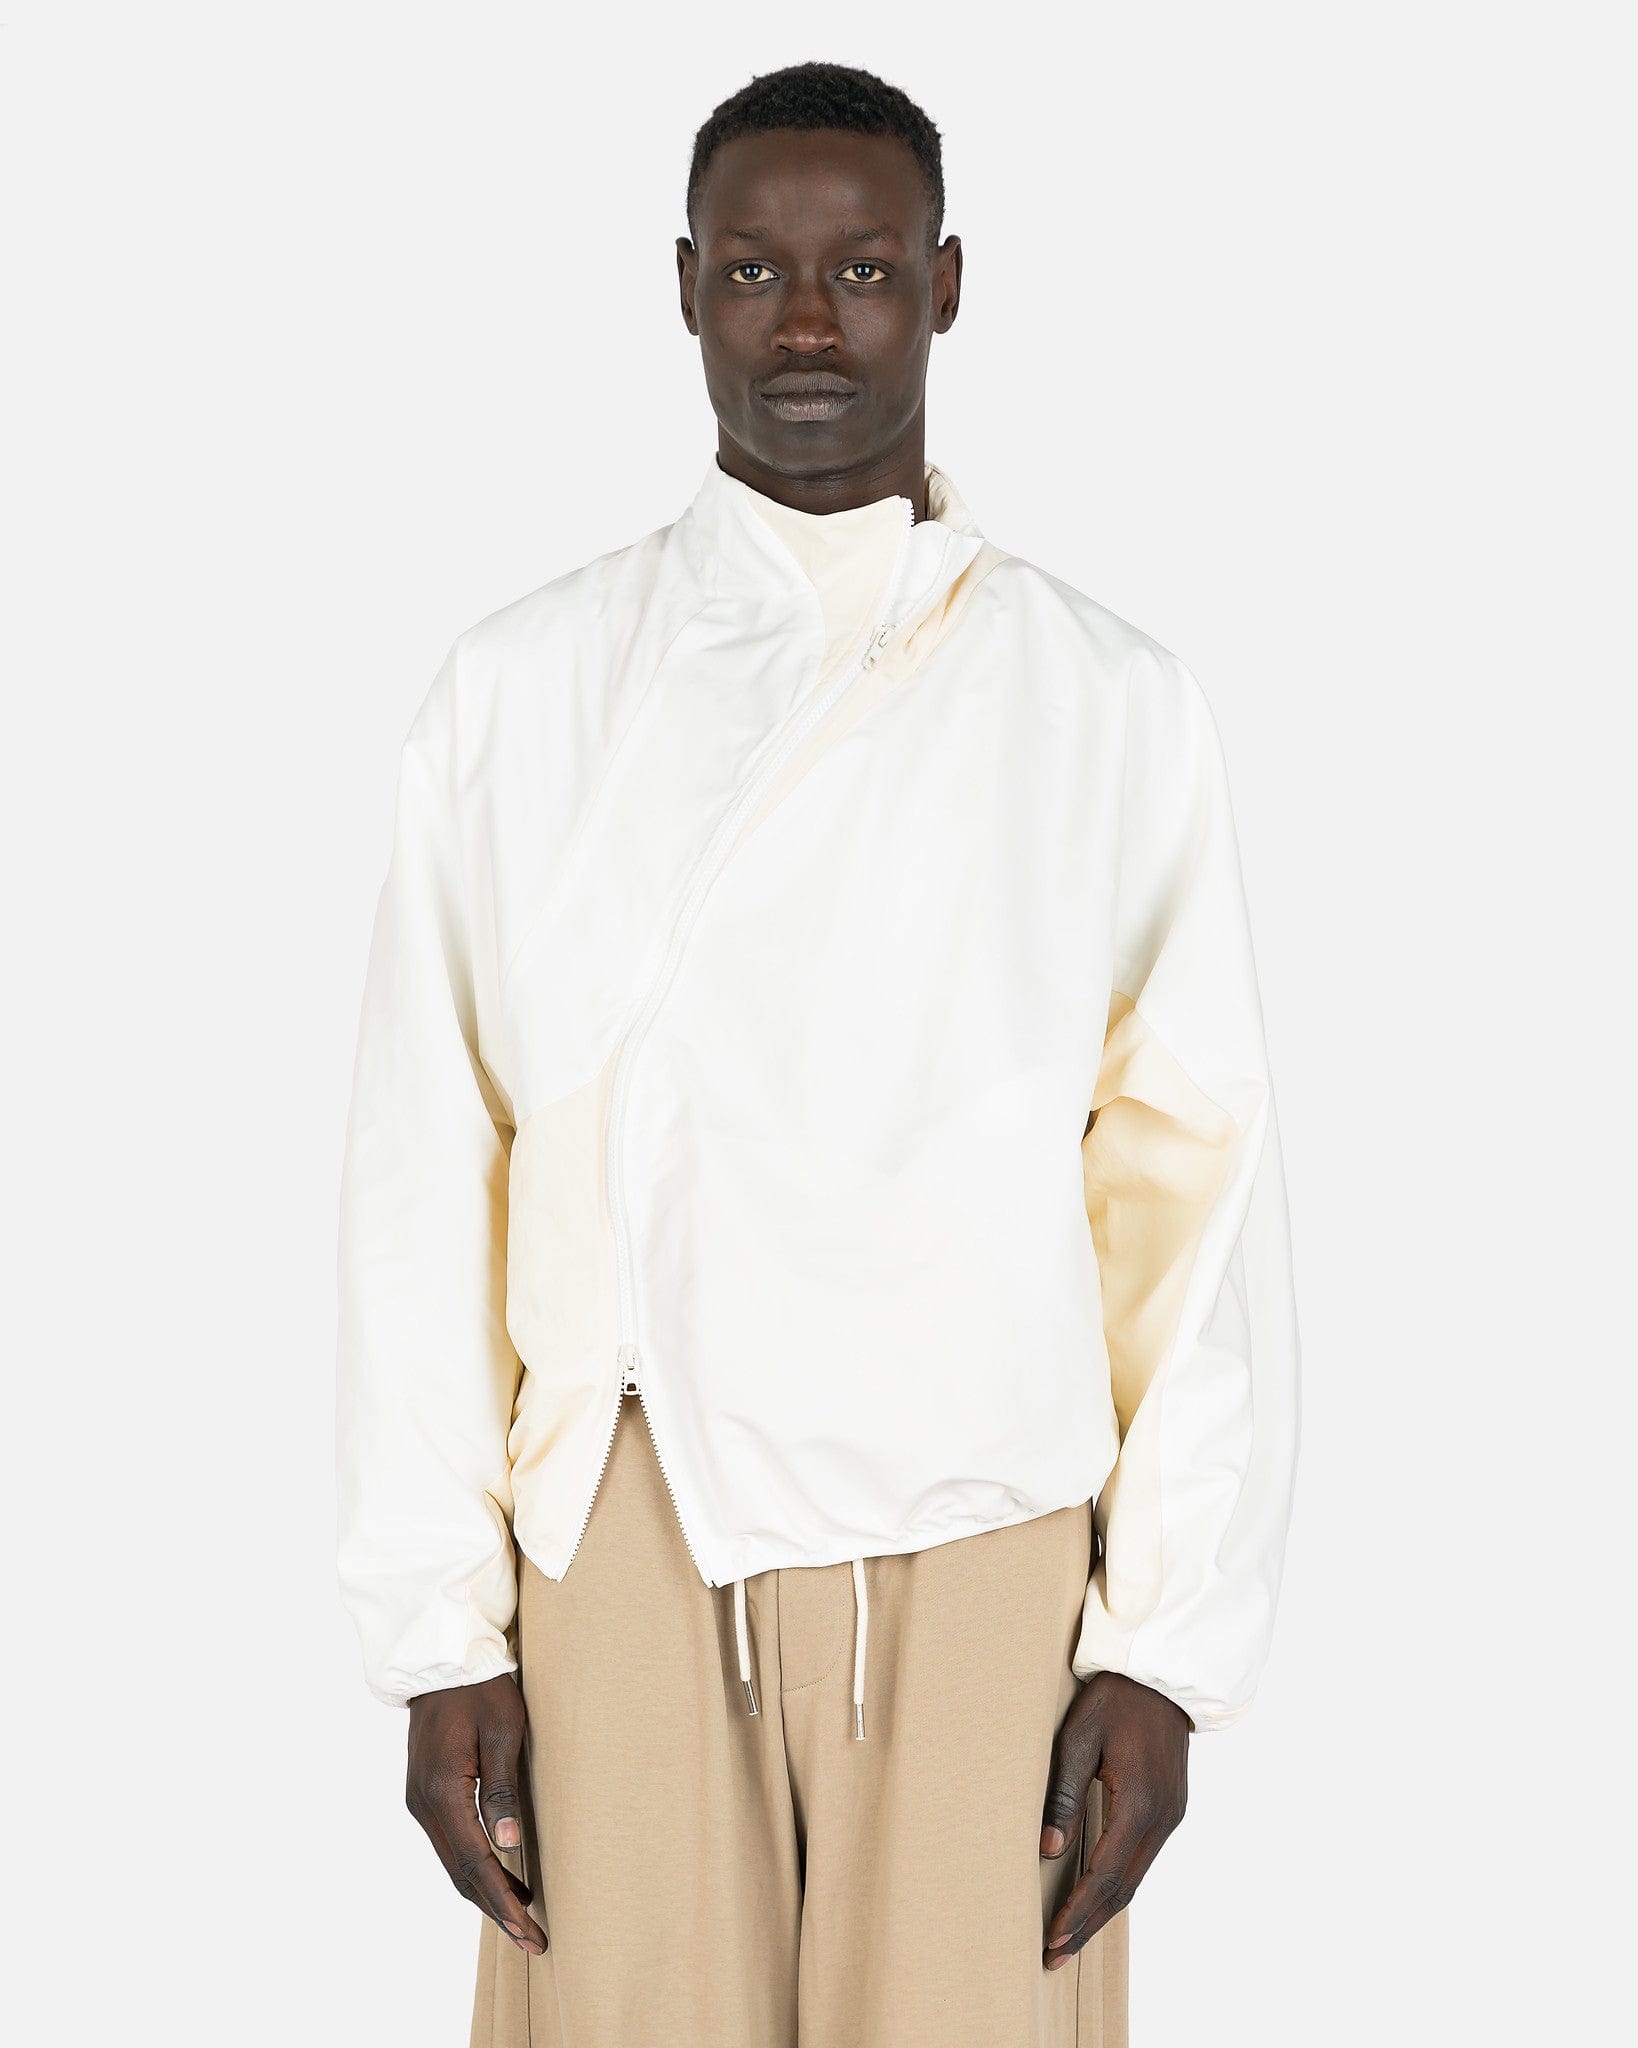 POST ARCHIVE FACTION (P.A.F) Men's Jackets 4.0+ Technical Jacket Right in White